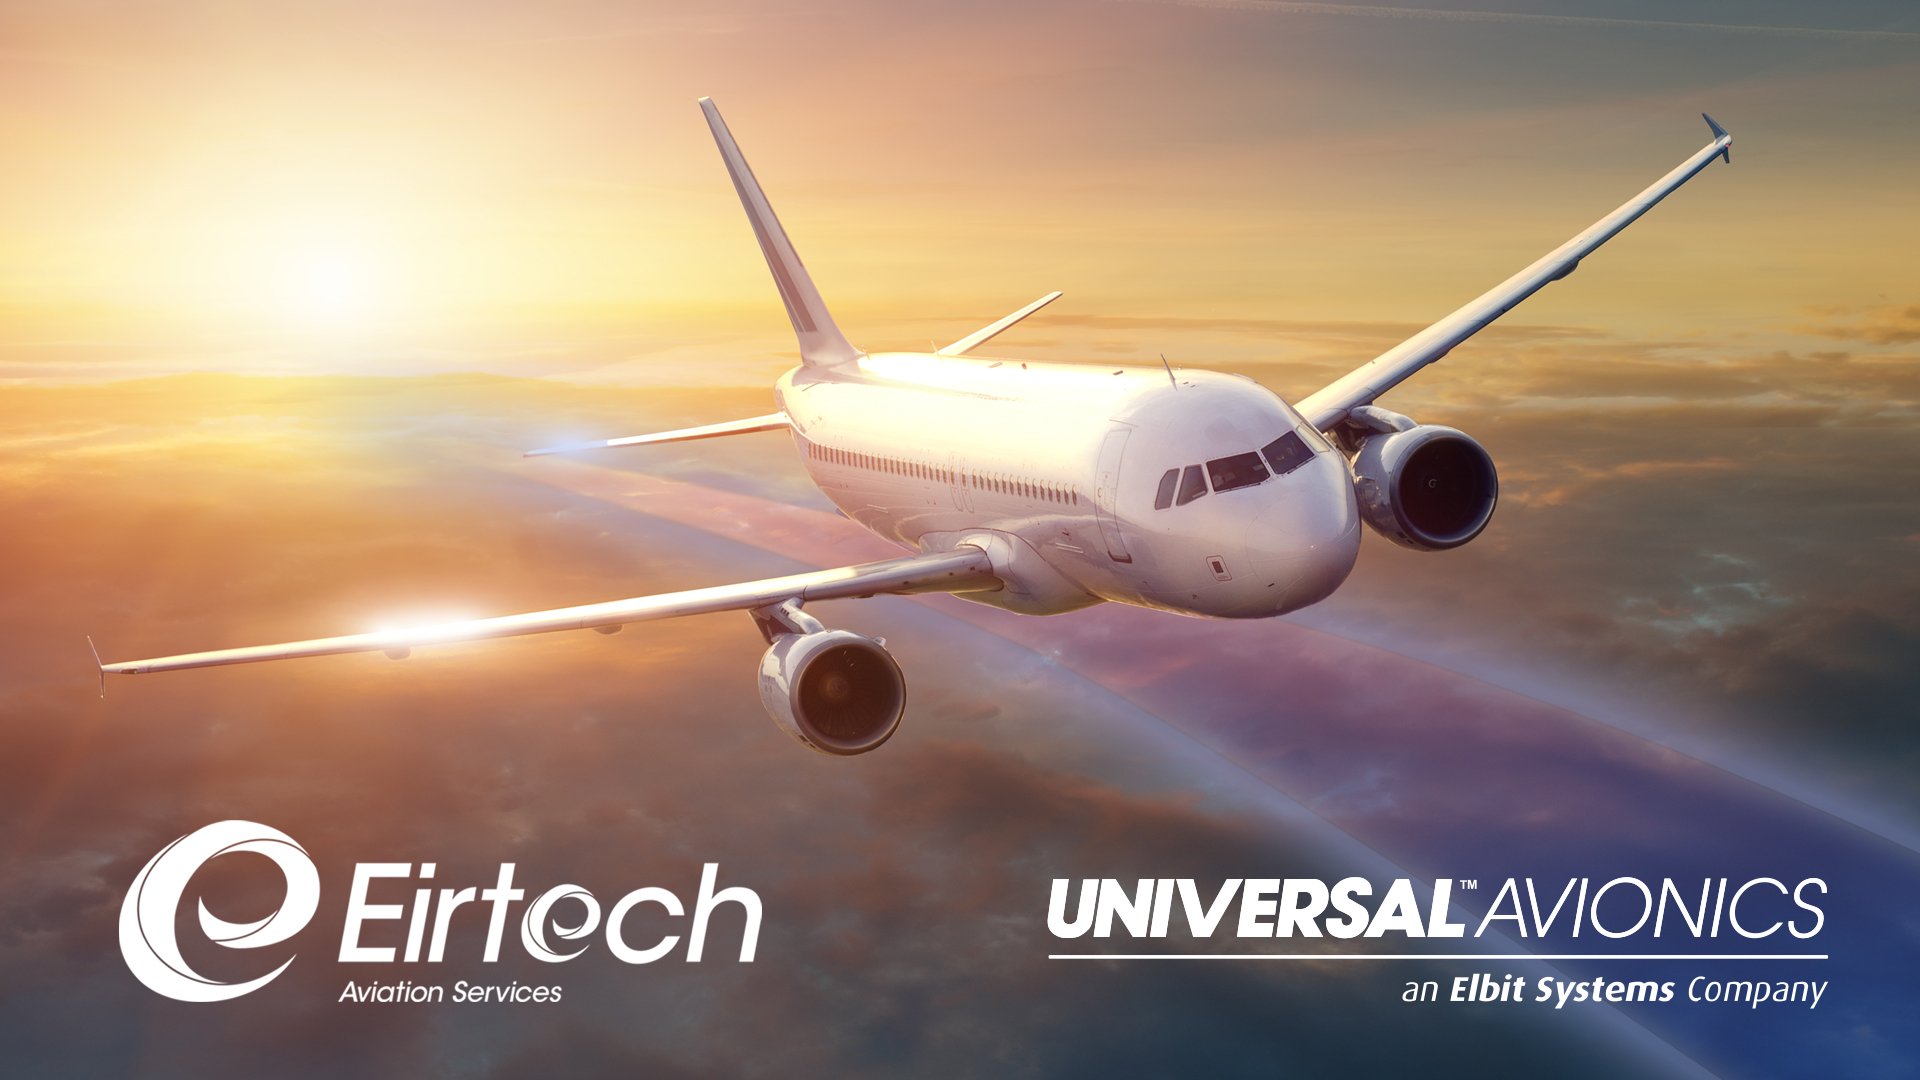 Universal Avionics data link selected for A320 upgrade by Eirtech Aviation Services